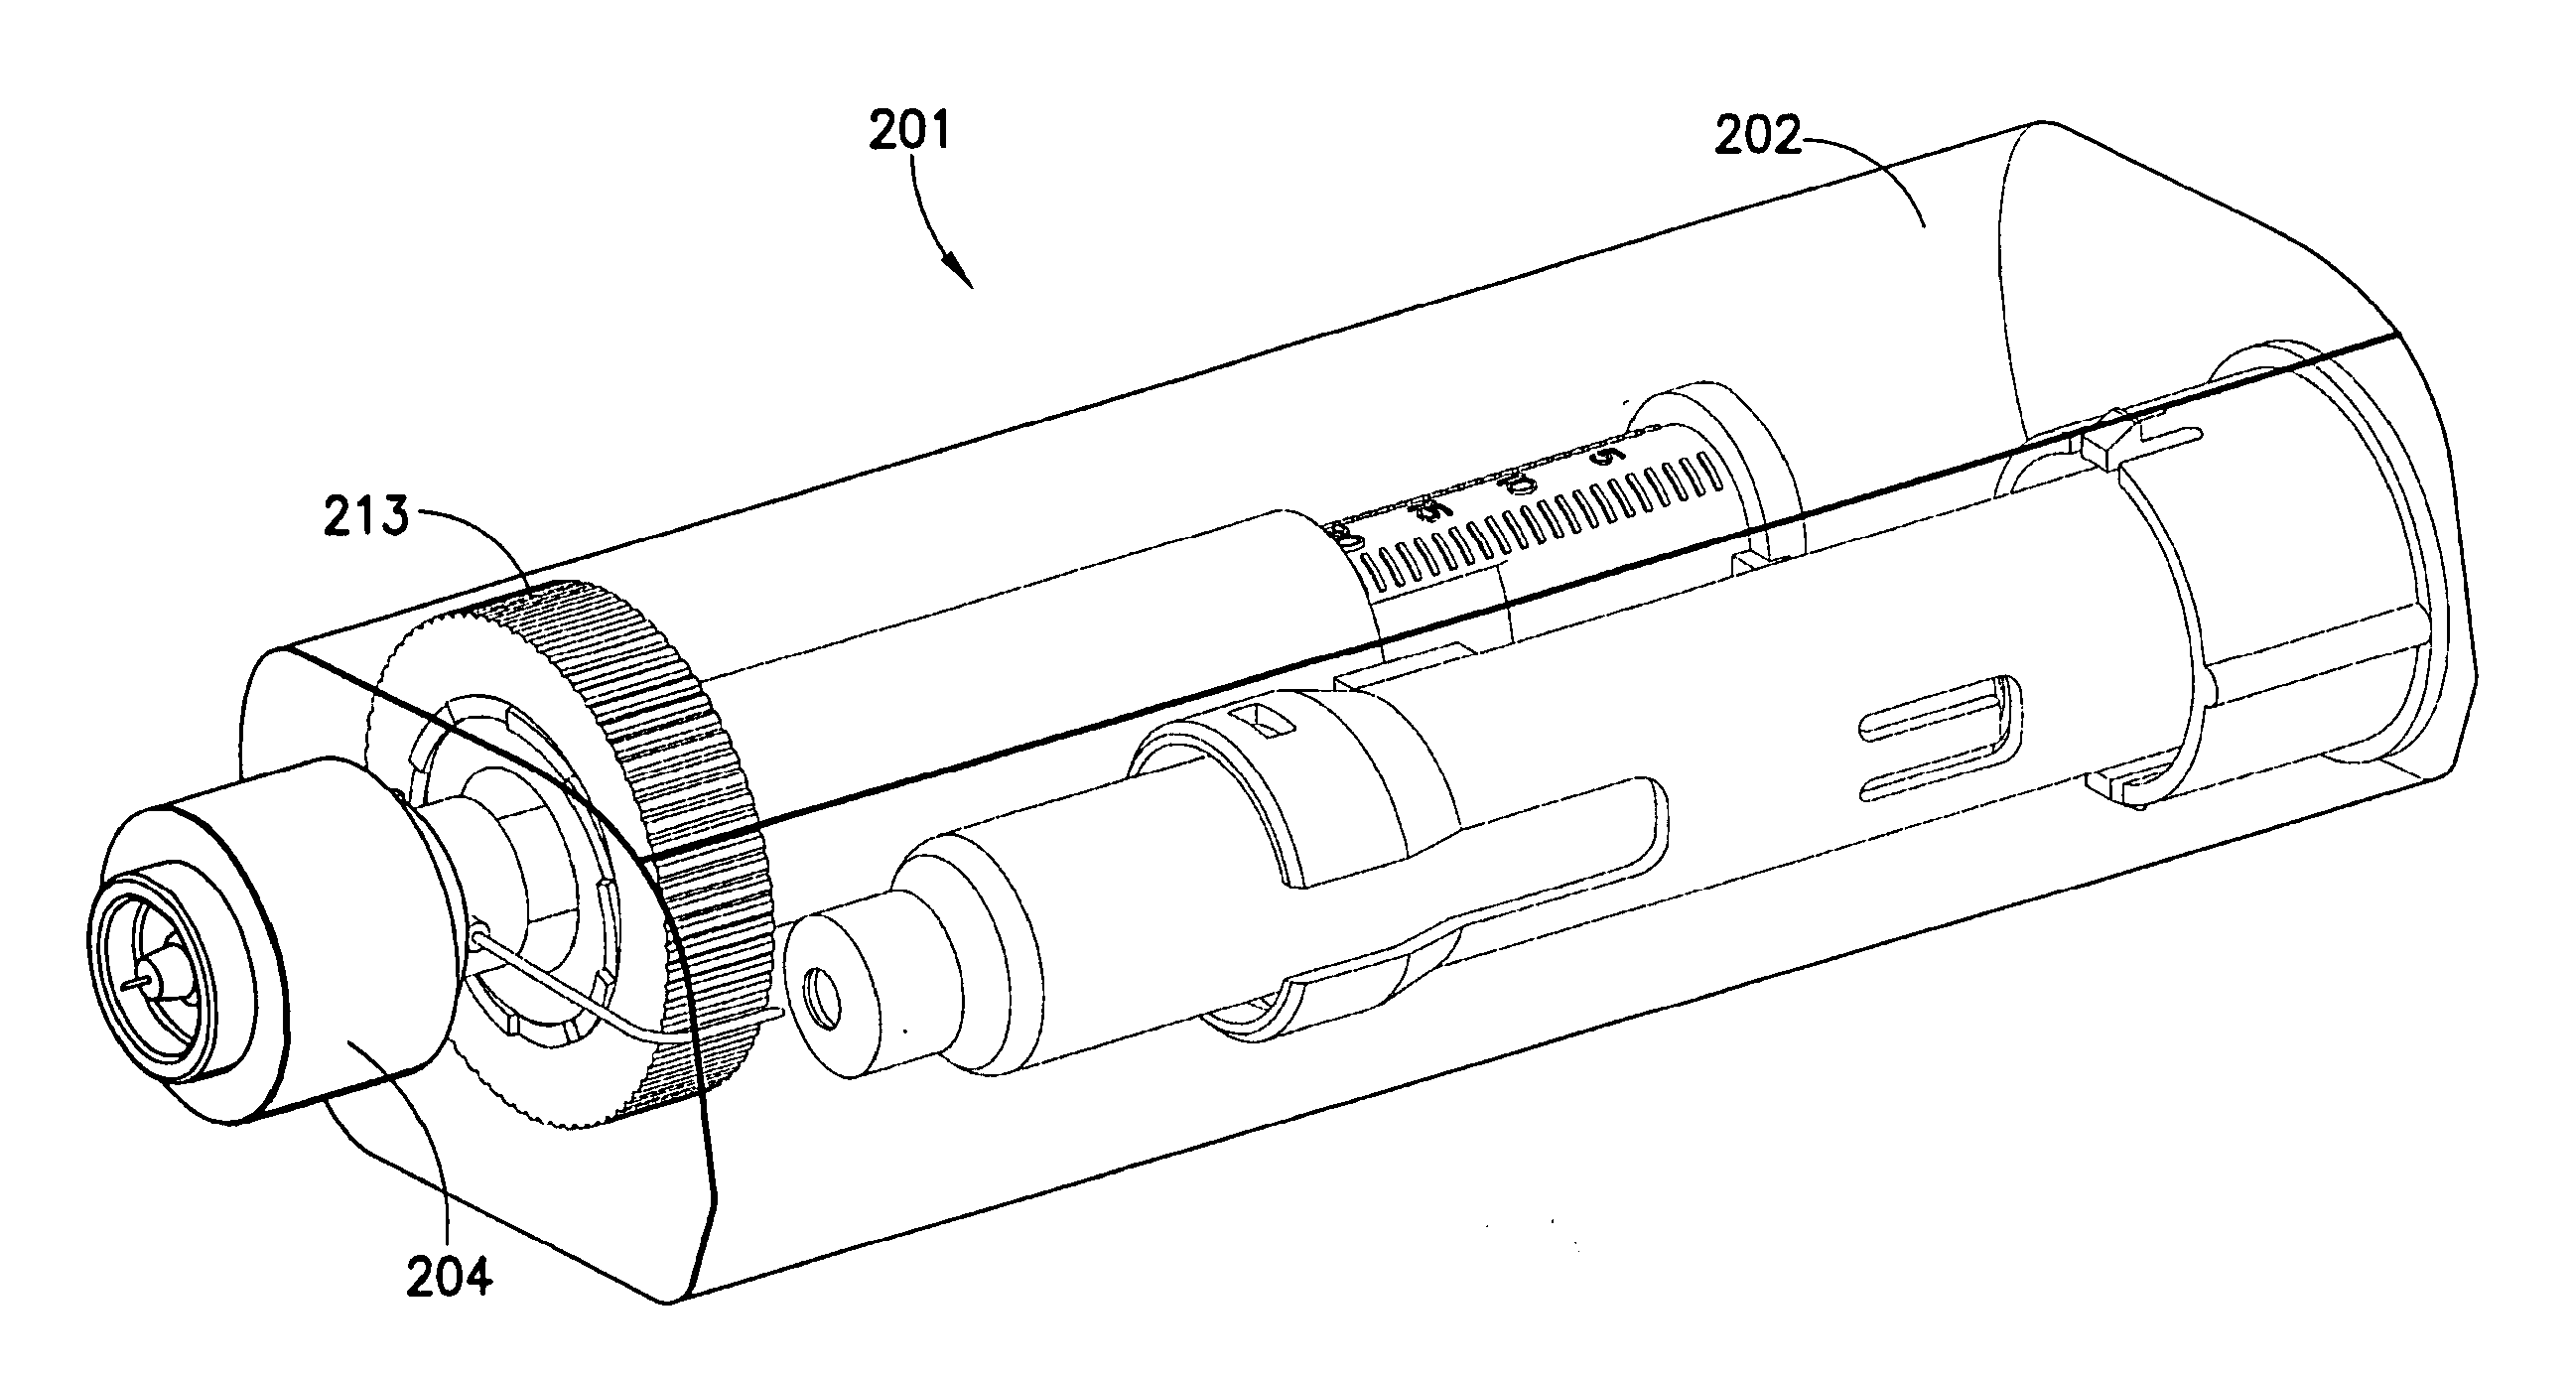 Dual-chambered drug delivery device for high pressure injections